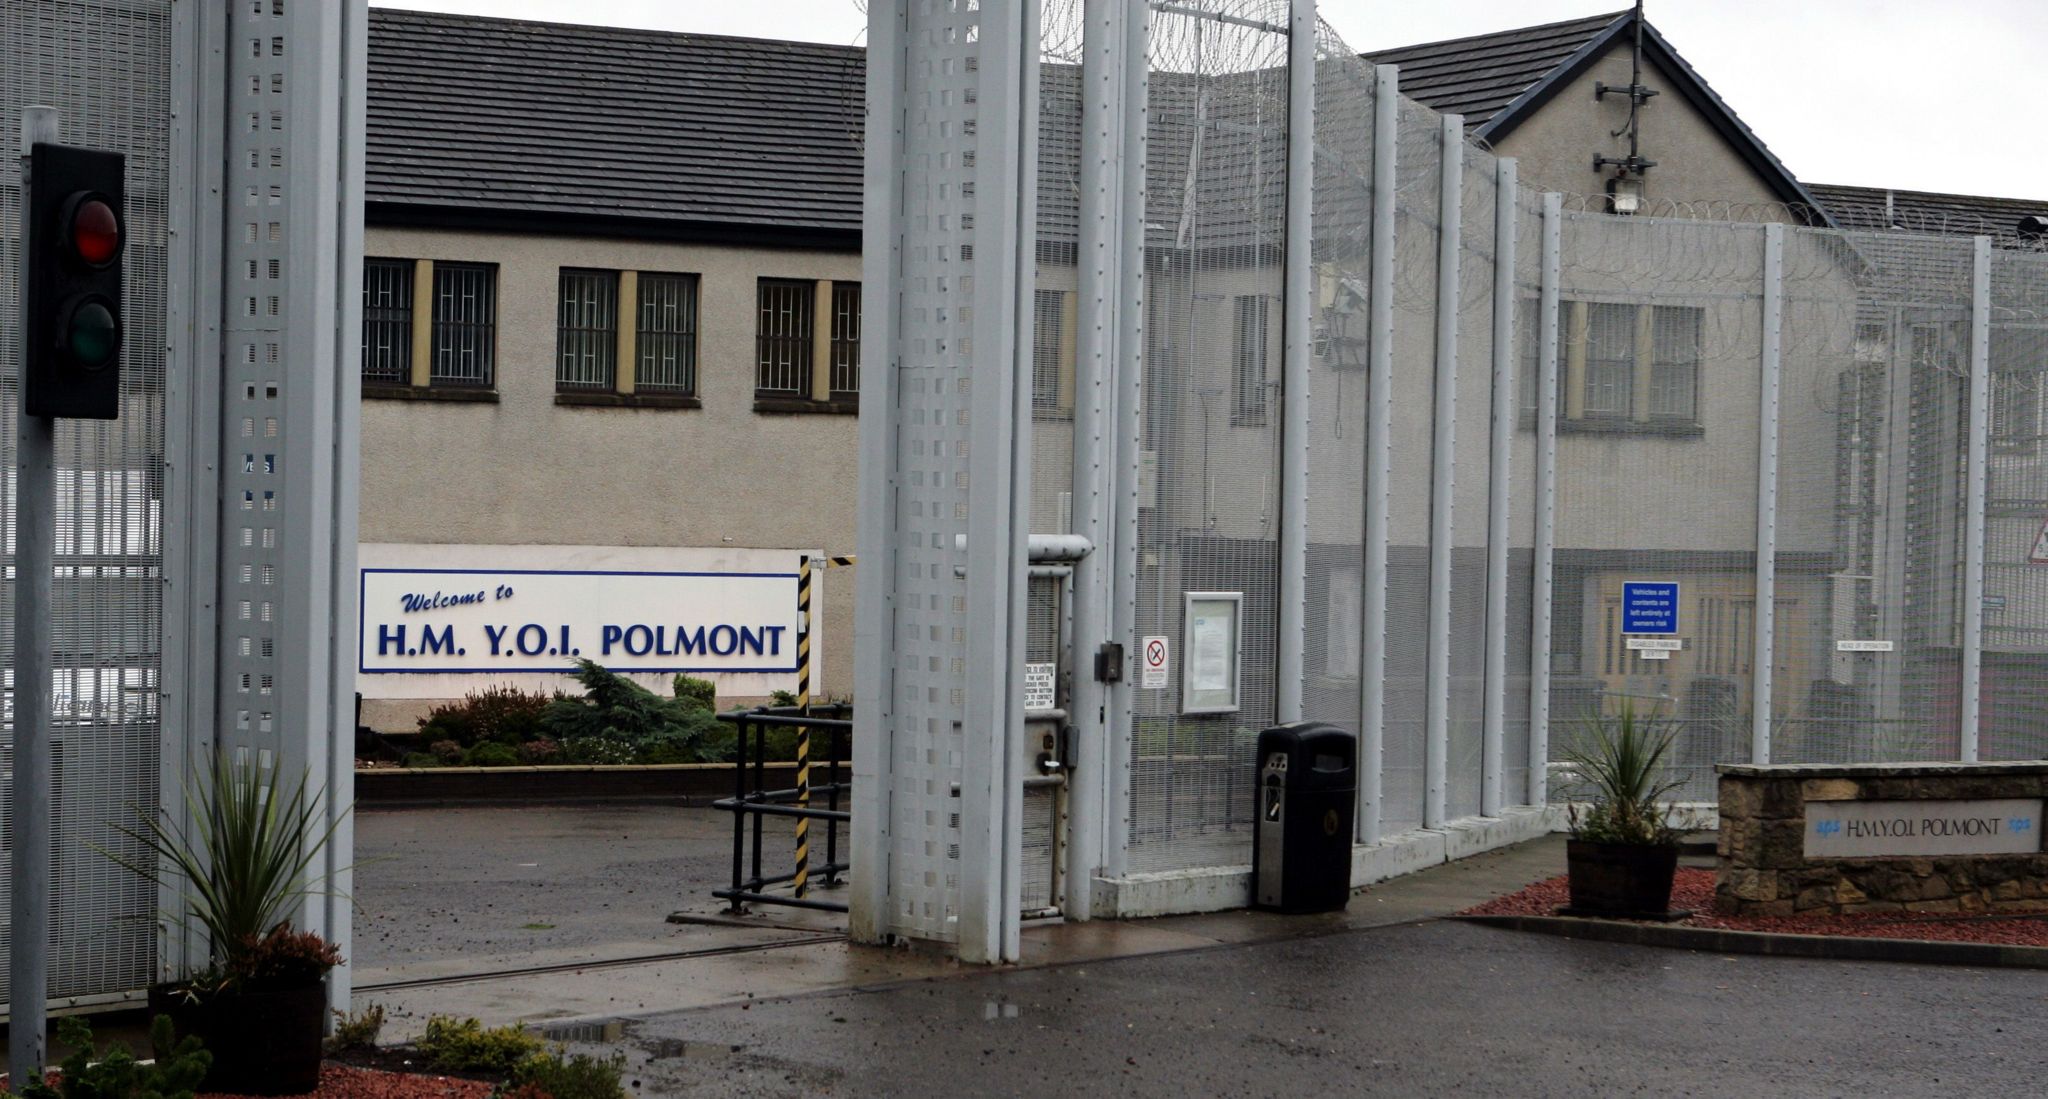 Exterior shot of HM YOI Polmont - a sand coloured building surrounded by wire fencing and bars on the windows